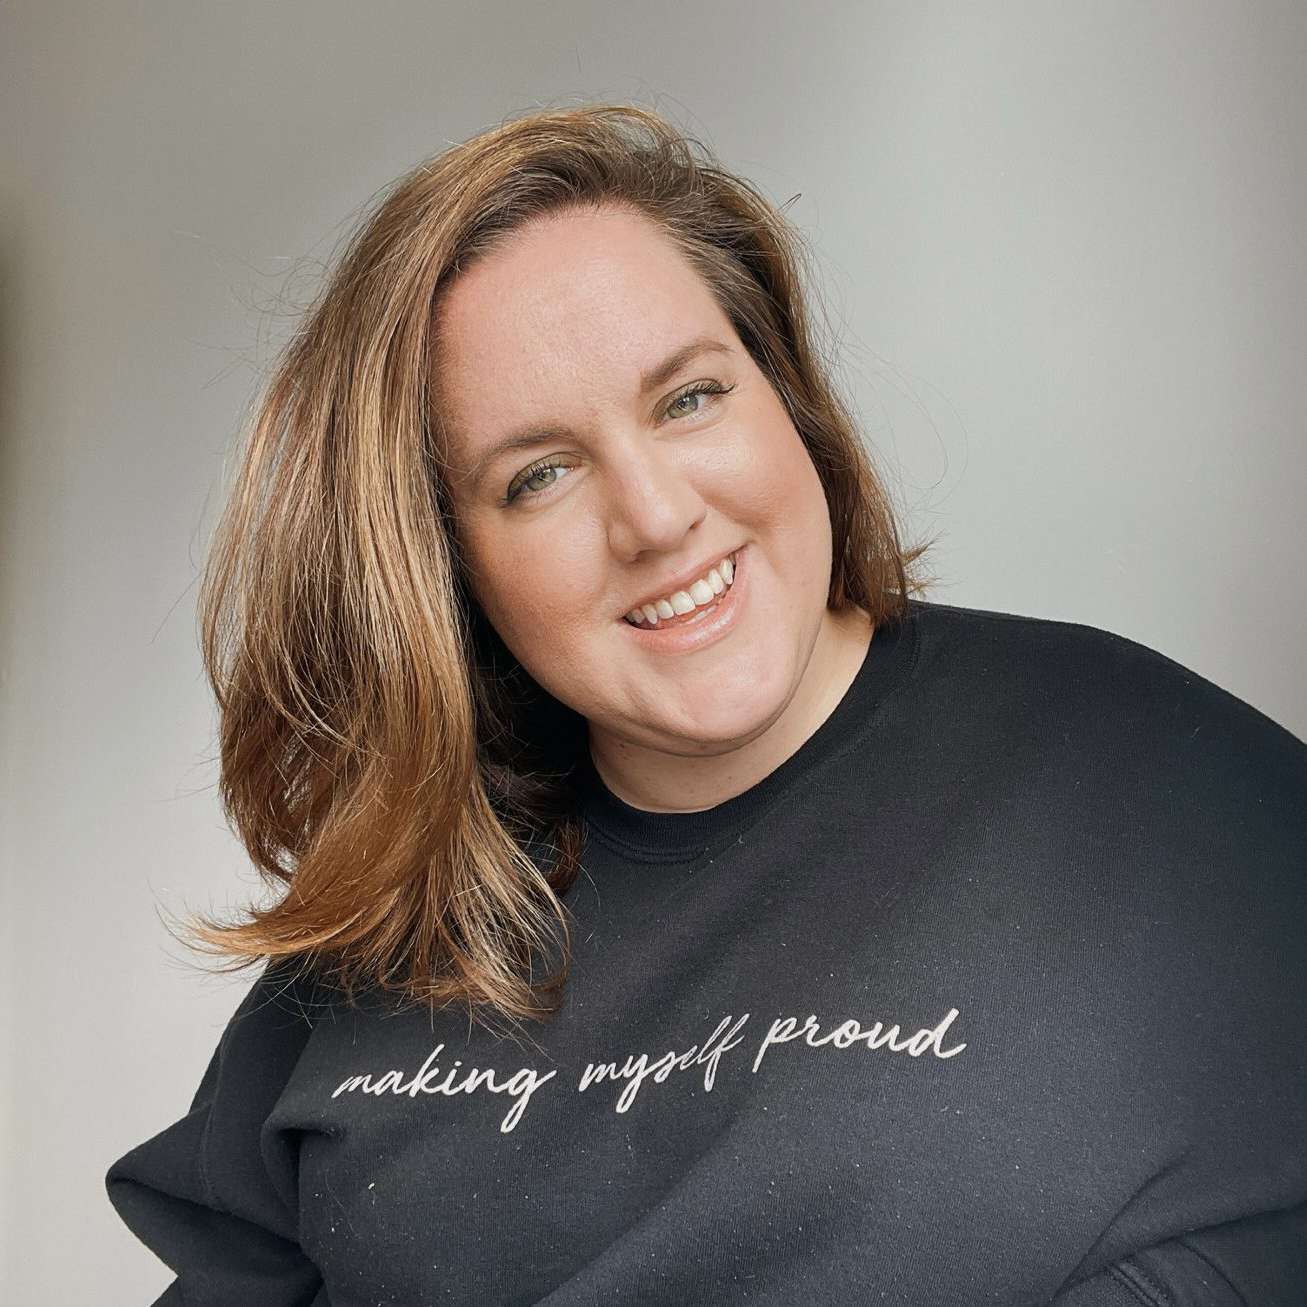 Nat is a white woman wearing a jumper that reads "Making myself proud"